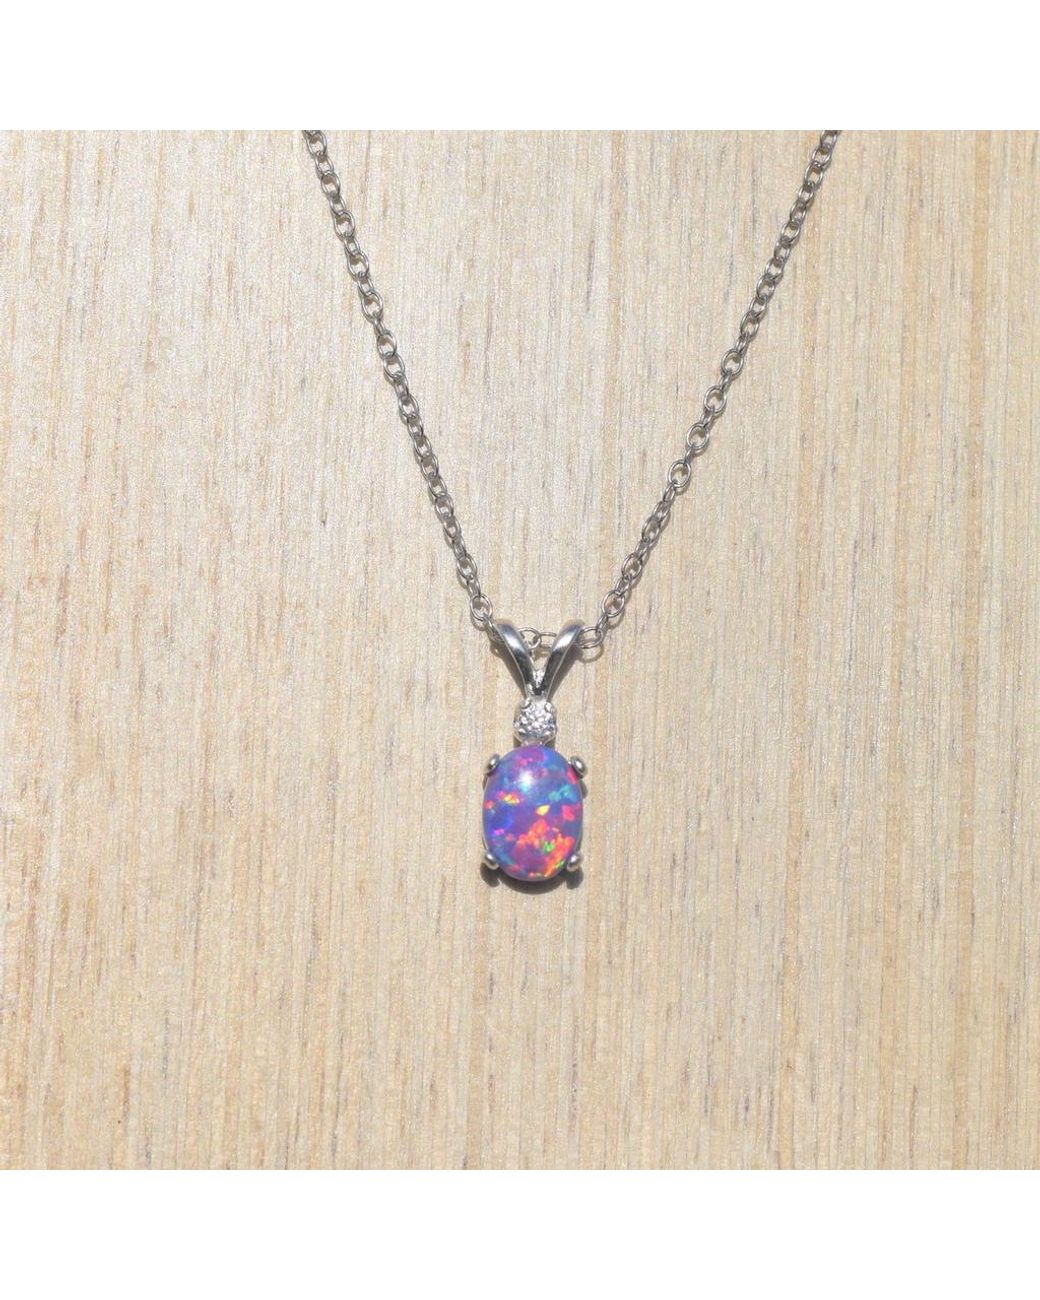 Angel Lavender Purple Fire Opal Inlay Silver Jewelry Necklace Pendant